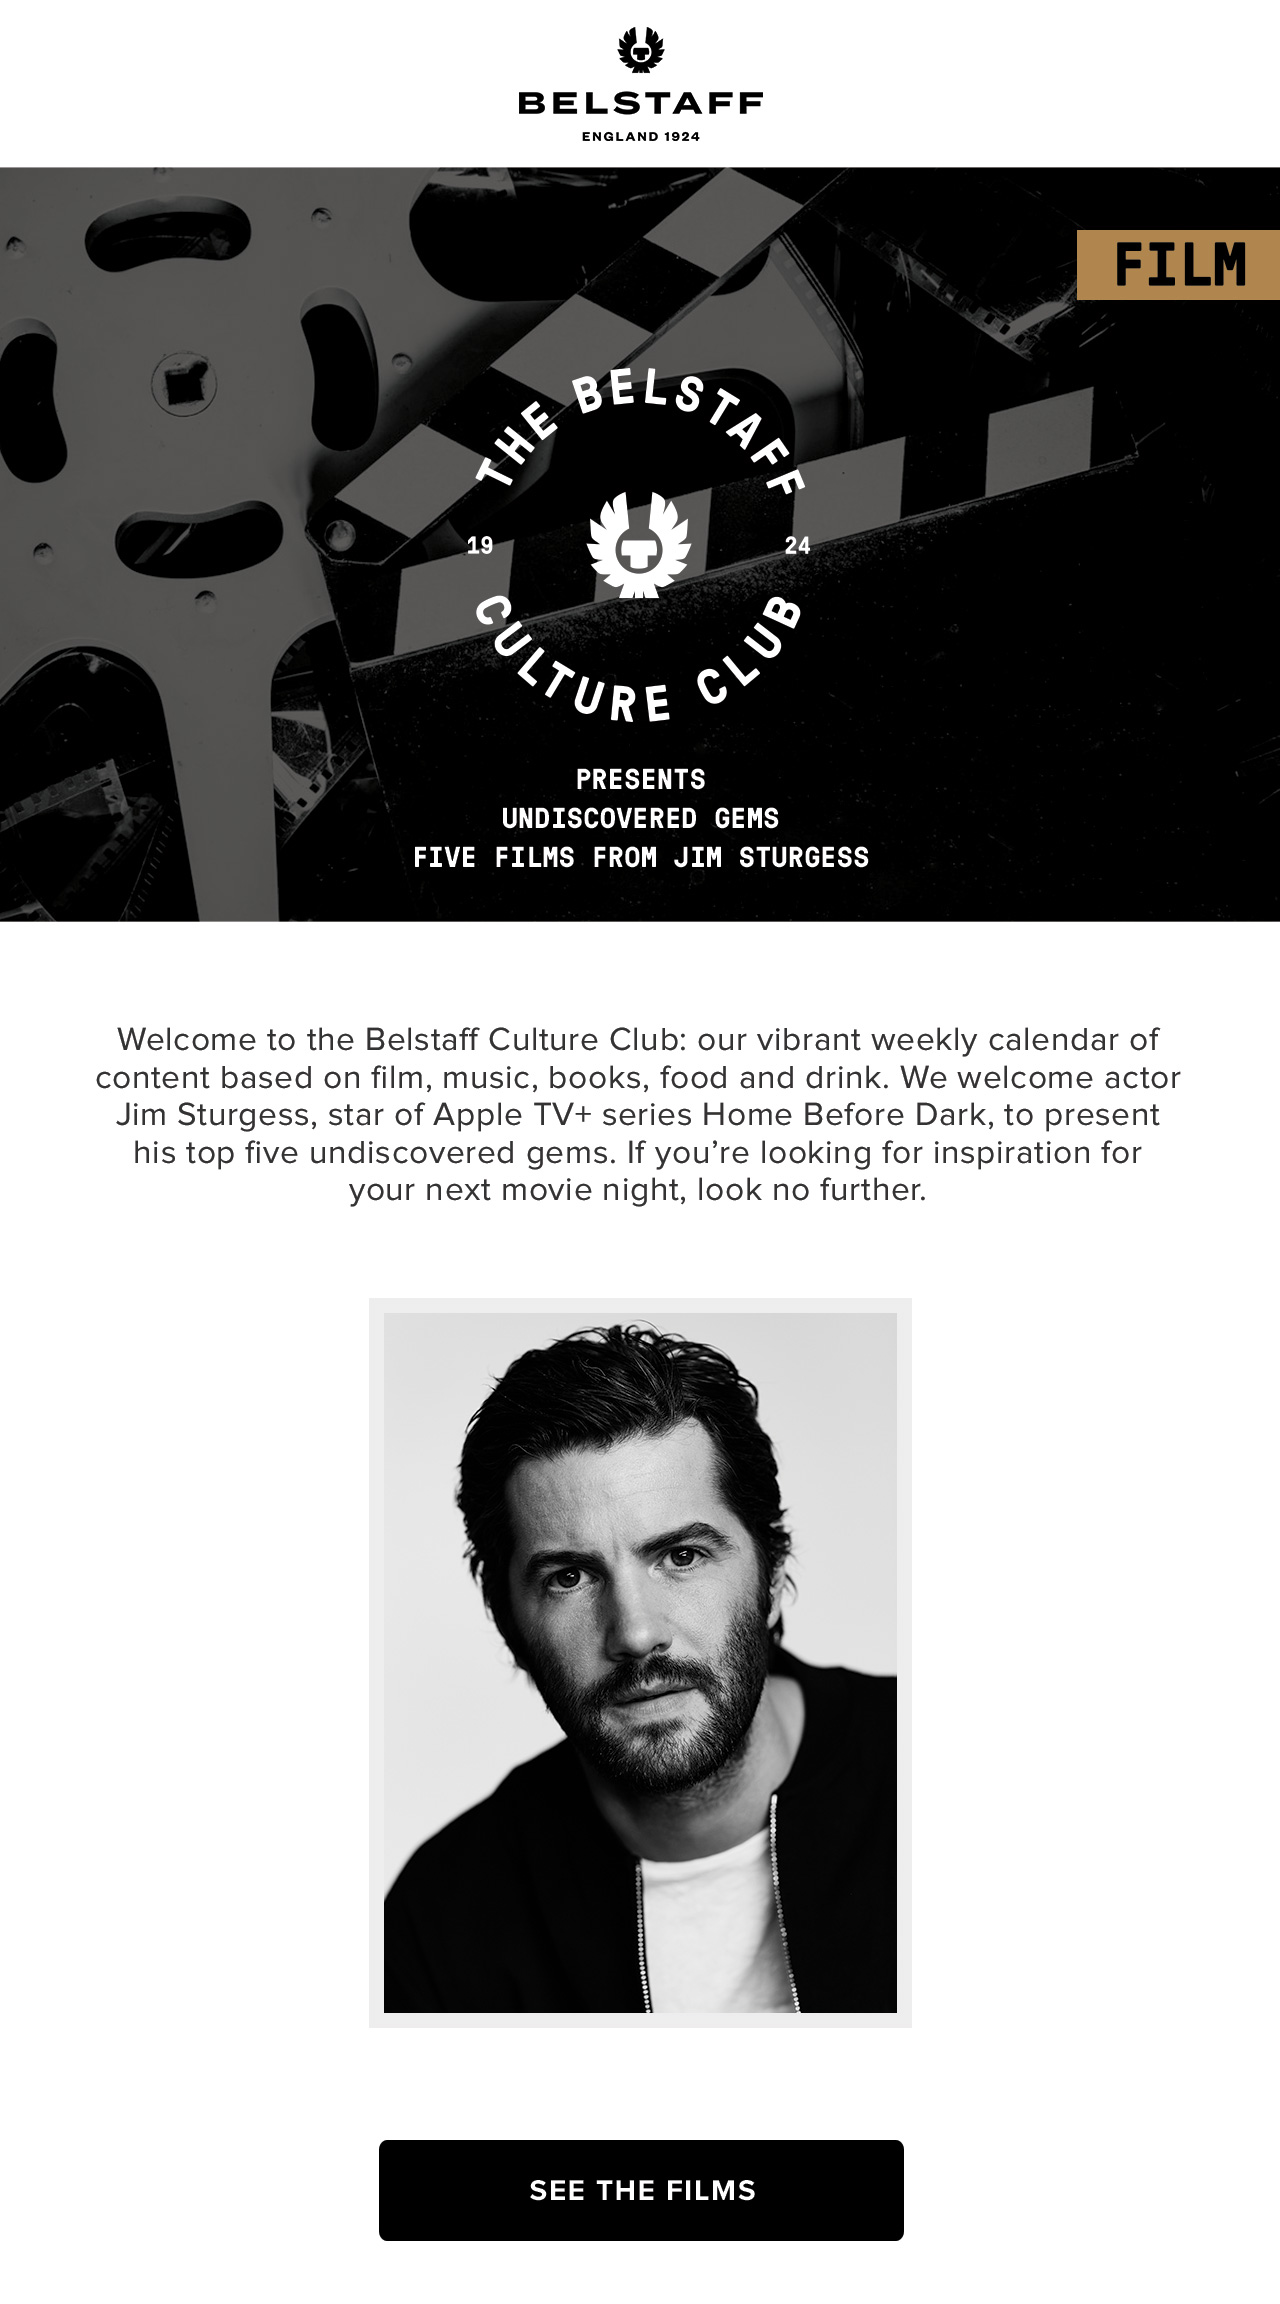 Welcome to the Belstaff Culture Club: our vibrant weekly calendar of content based on film, music, books, food and drink.